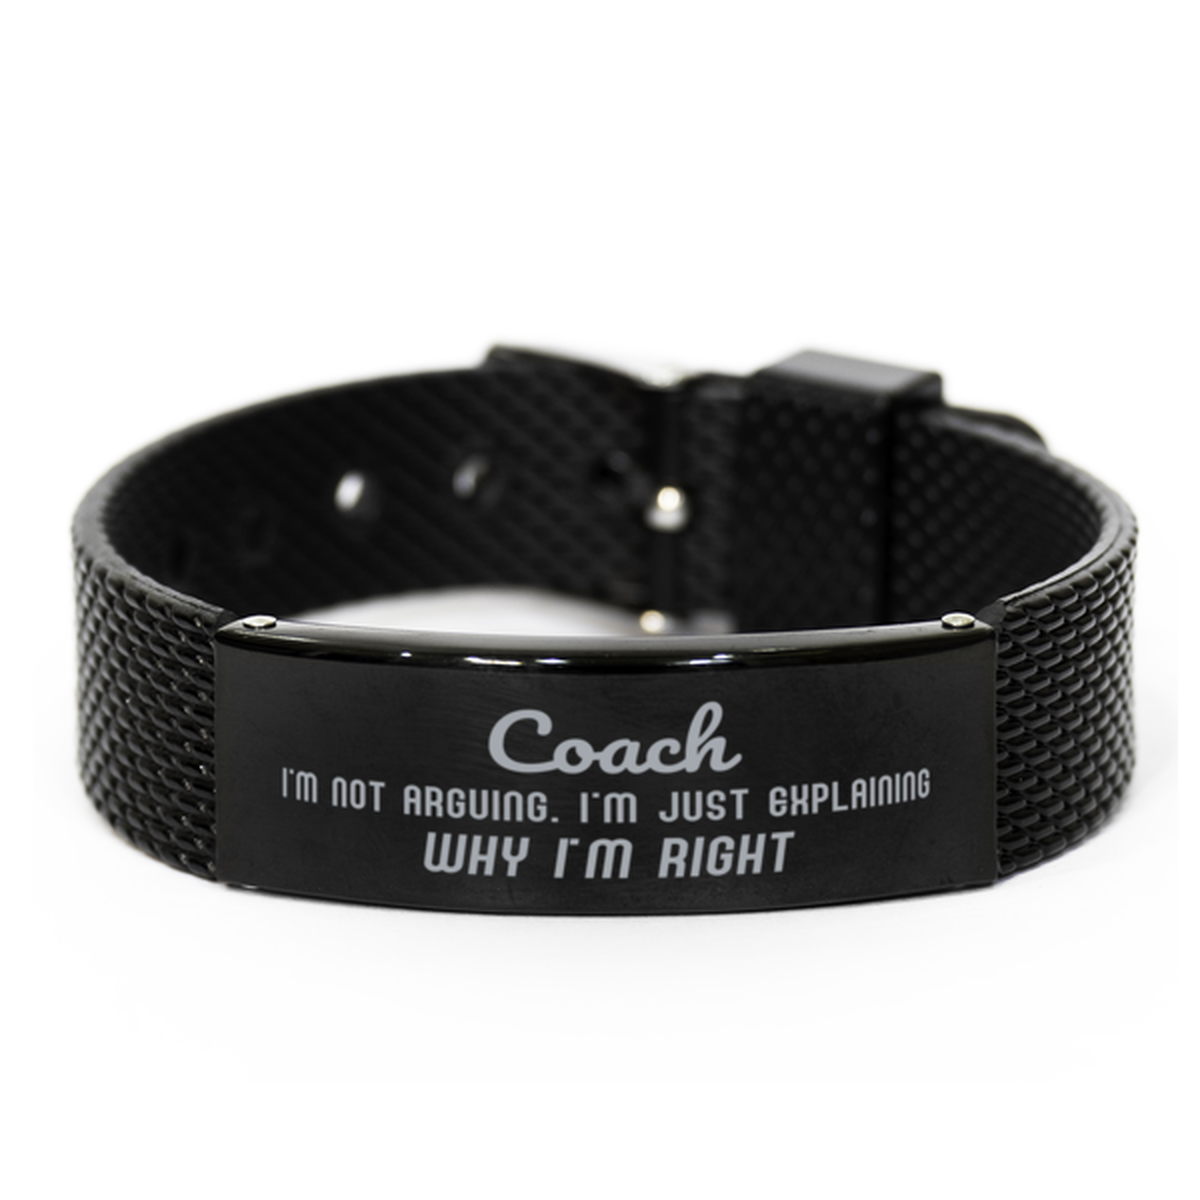 Coach I'm not Arguing. I'm Just Explaining Why I'm RIGHT Black Shark Mesh Bracelet, Funny Saying Quote Coach Gifts For Coach Graduation Birthday Christmas Gifts for Men Women Coworker